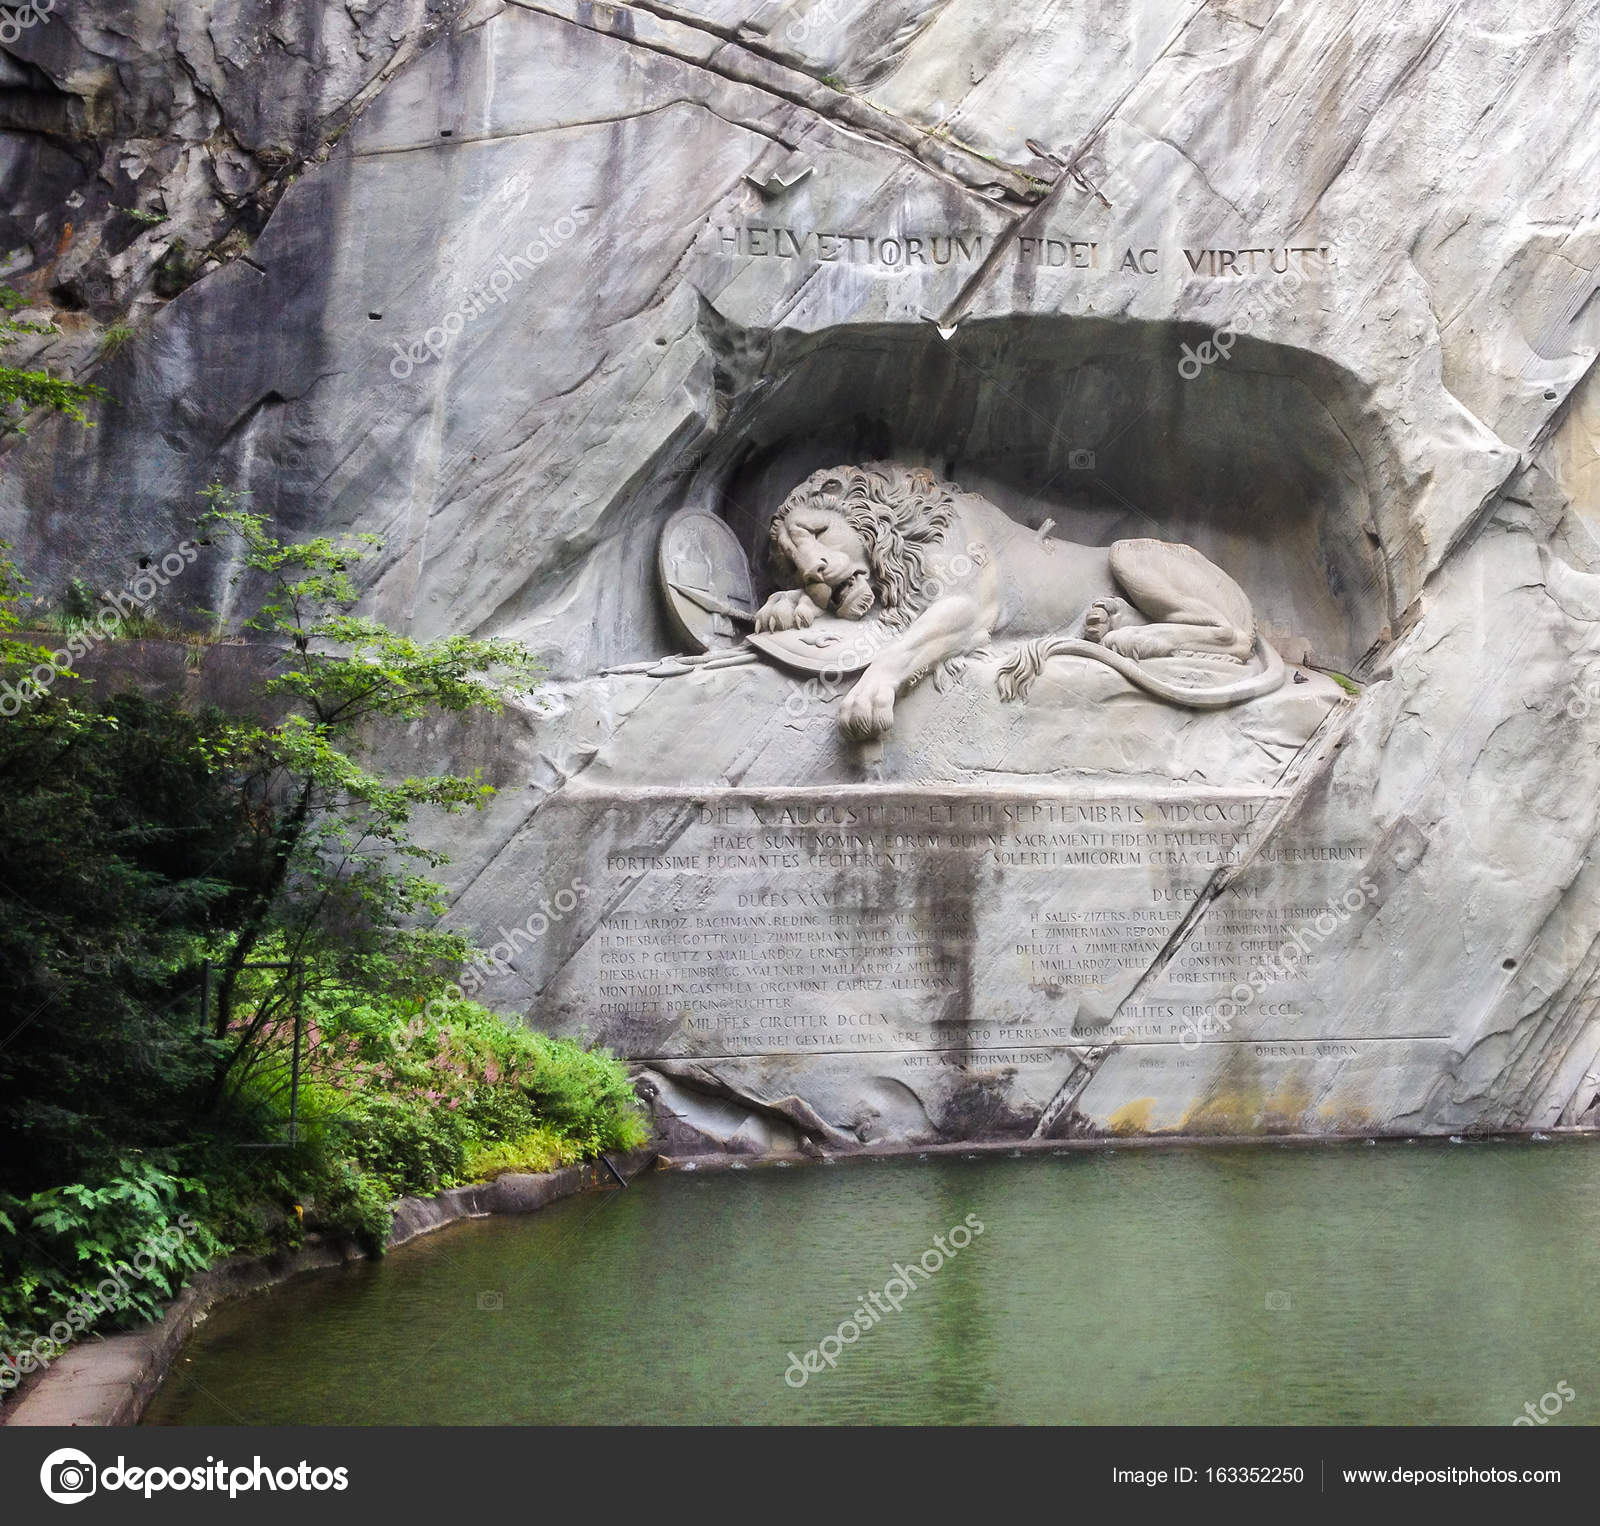 Dying Lion Monument German Lowendenkmal Carved On The Face Of Stone Cliff With The Pond In The Foreground In Luzern Switzerland Europe Stock Photo Image By C Victorflowerfly